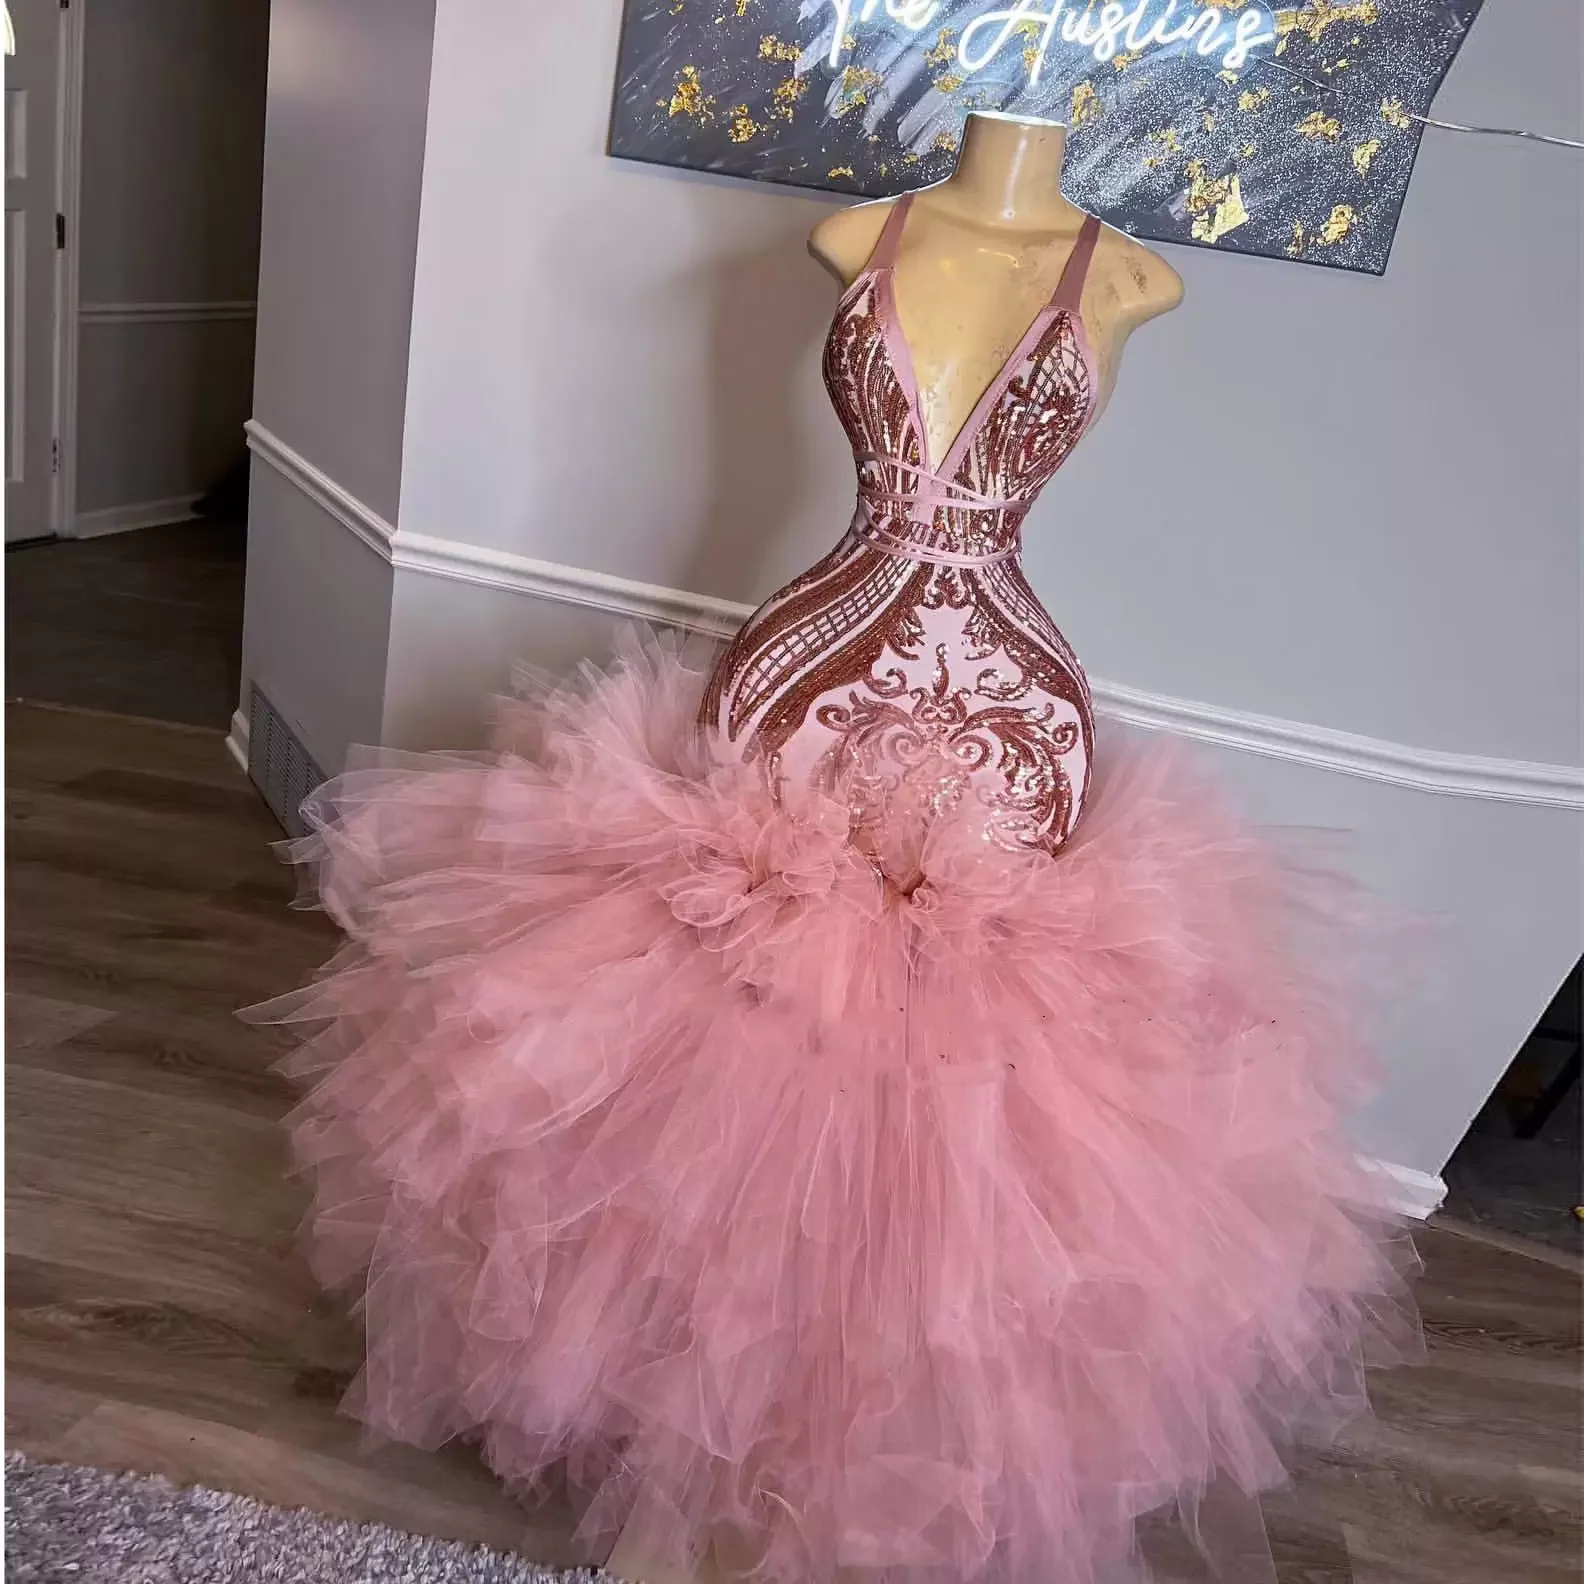 

Charming Pink Prom Dress For Black Girls Sparkly Sequined Halter Long Birthday Party Evening Gowns Women Special Occasion Wear